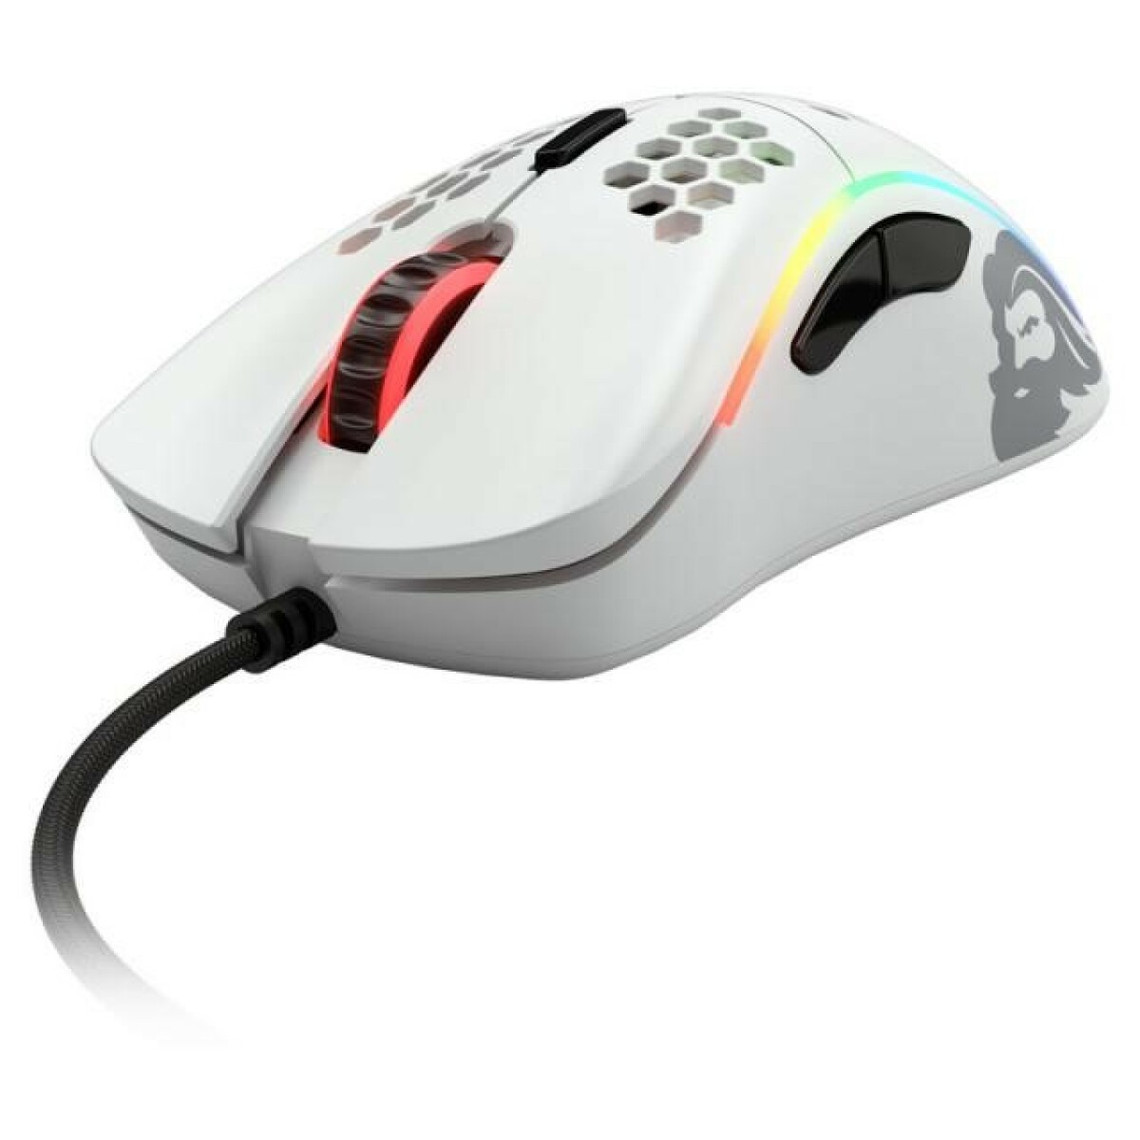 Glorious Pc Gaming Race - Model D Souris Gaming - Blanche - Souris